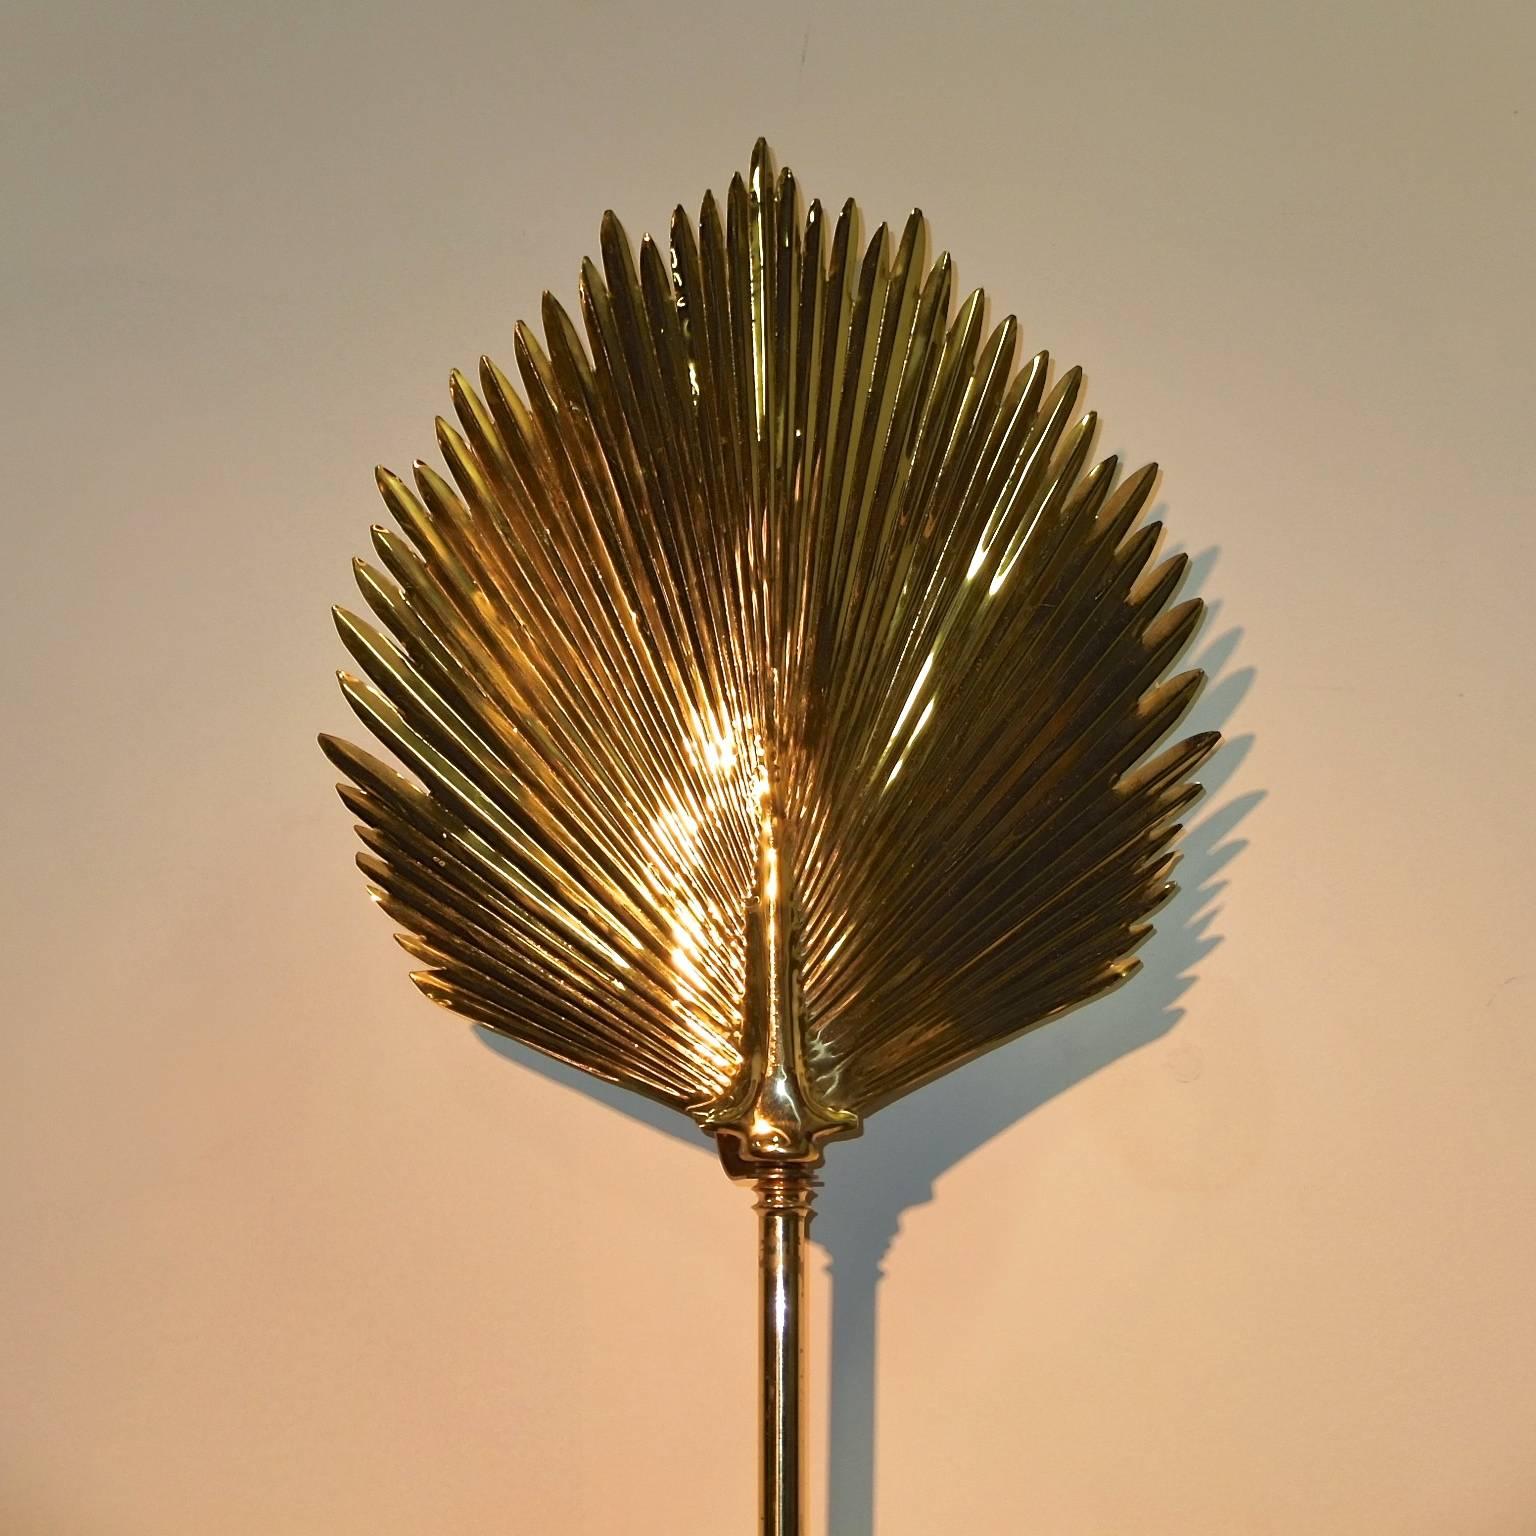 Unusual wall-mounted brass floor lamp in the style of Tommaso Barbi. Atop a long brass faux bamboo stem sits a large leaf-form brass reflector which is mounted to the wall by a rectangular brass backplate with a standard size Edison screw cap